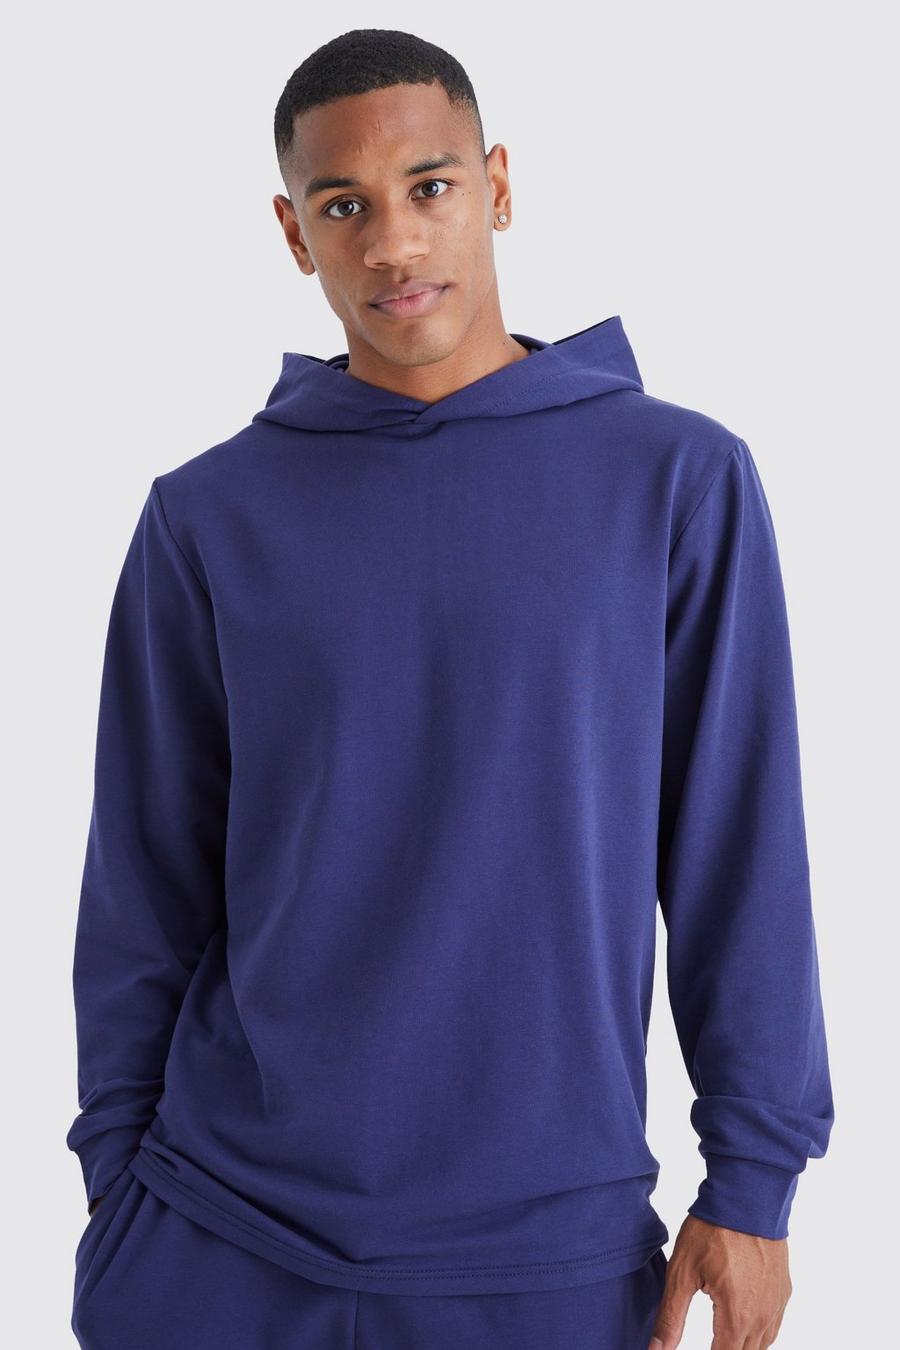 Buy Lounge Hoodie, Fast Delivery